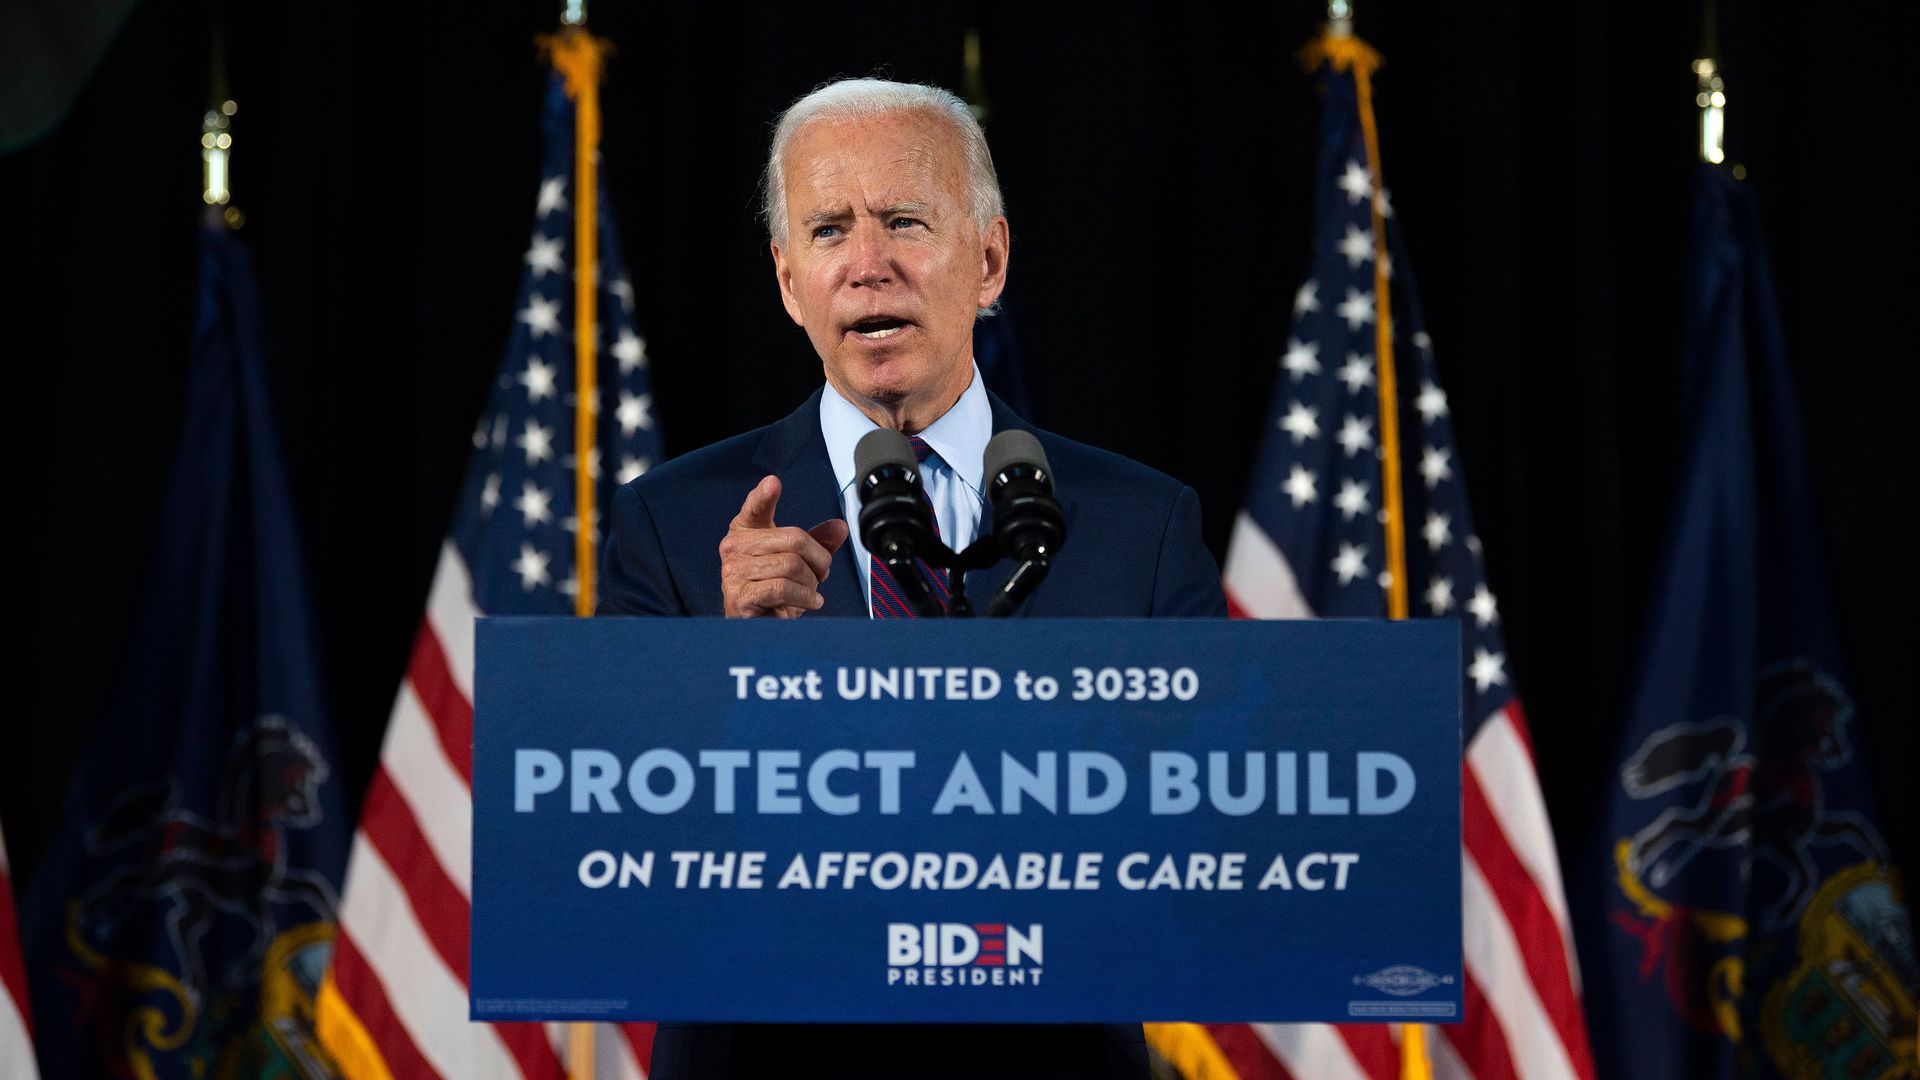 Joe Biden speaks at an event about affordable health care.